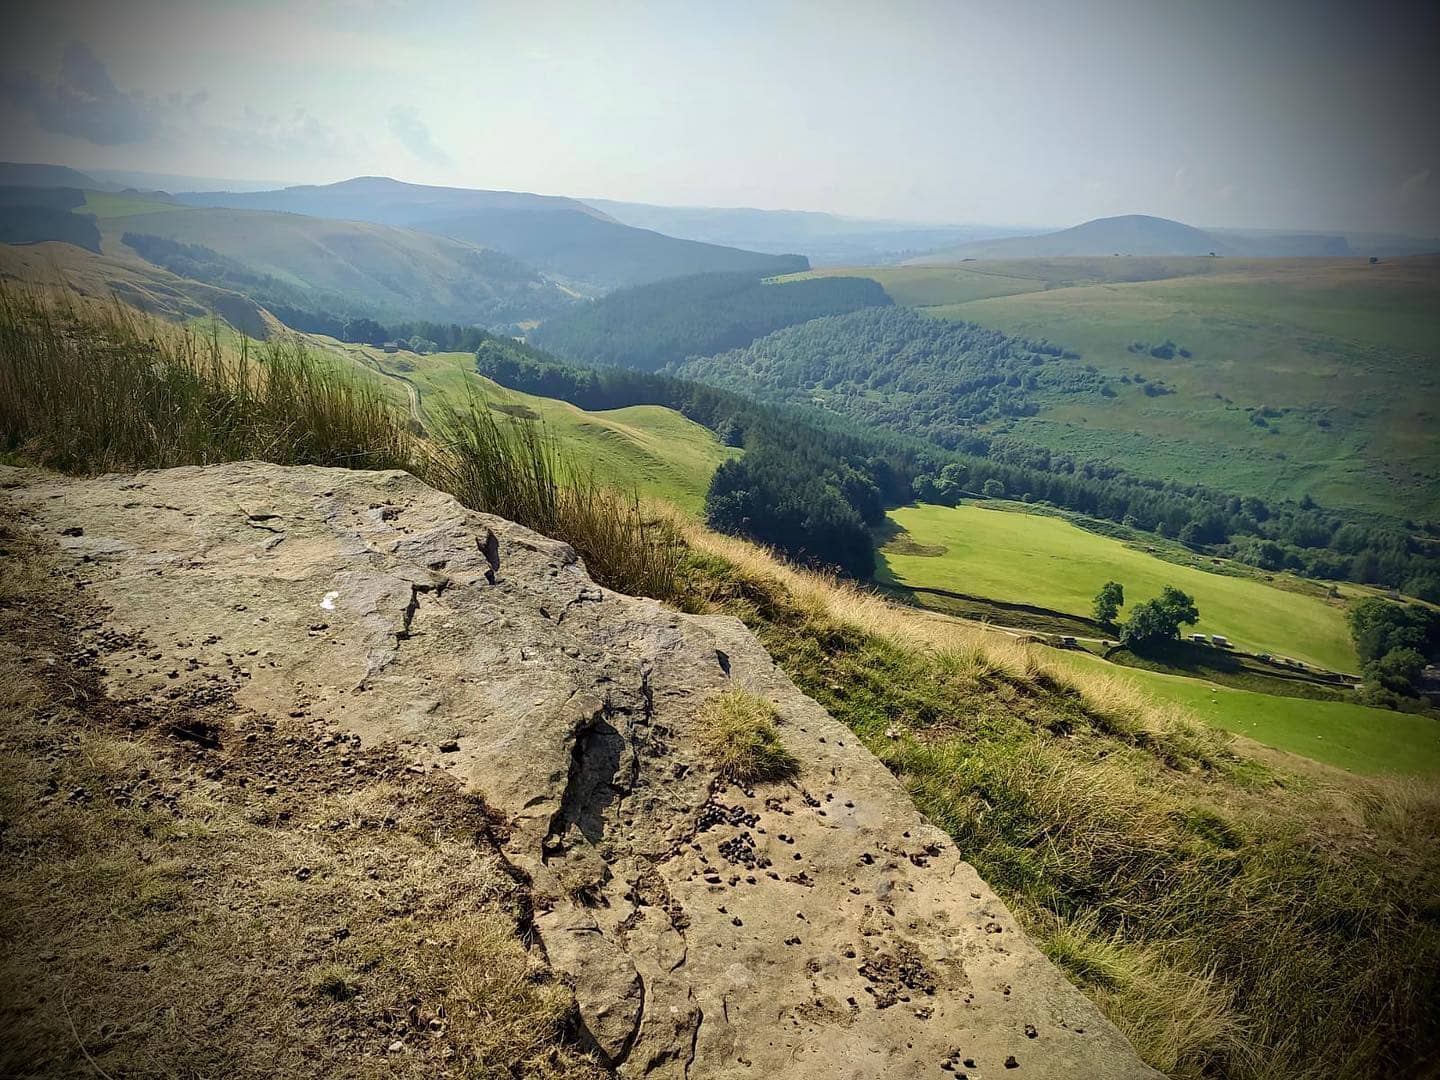 Entries close for the 2021 Peak District Challenge on 17th August! Don’t miss out, sign up now at...